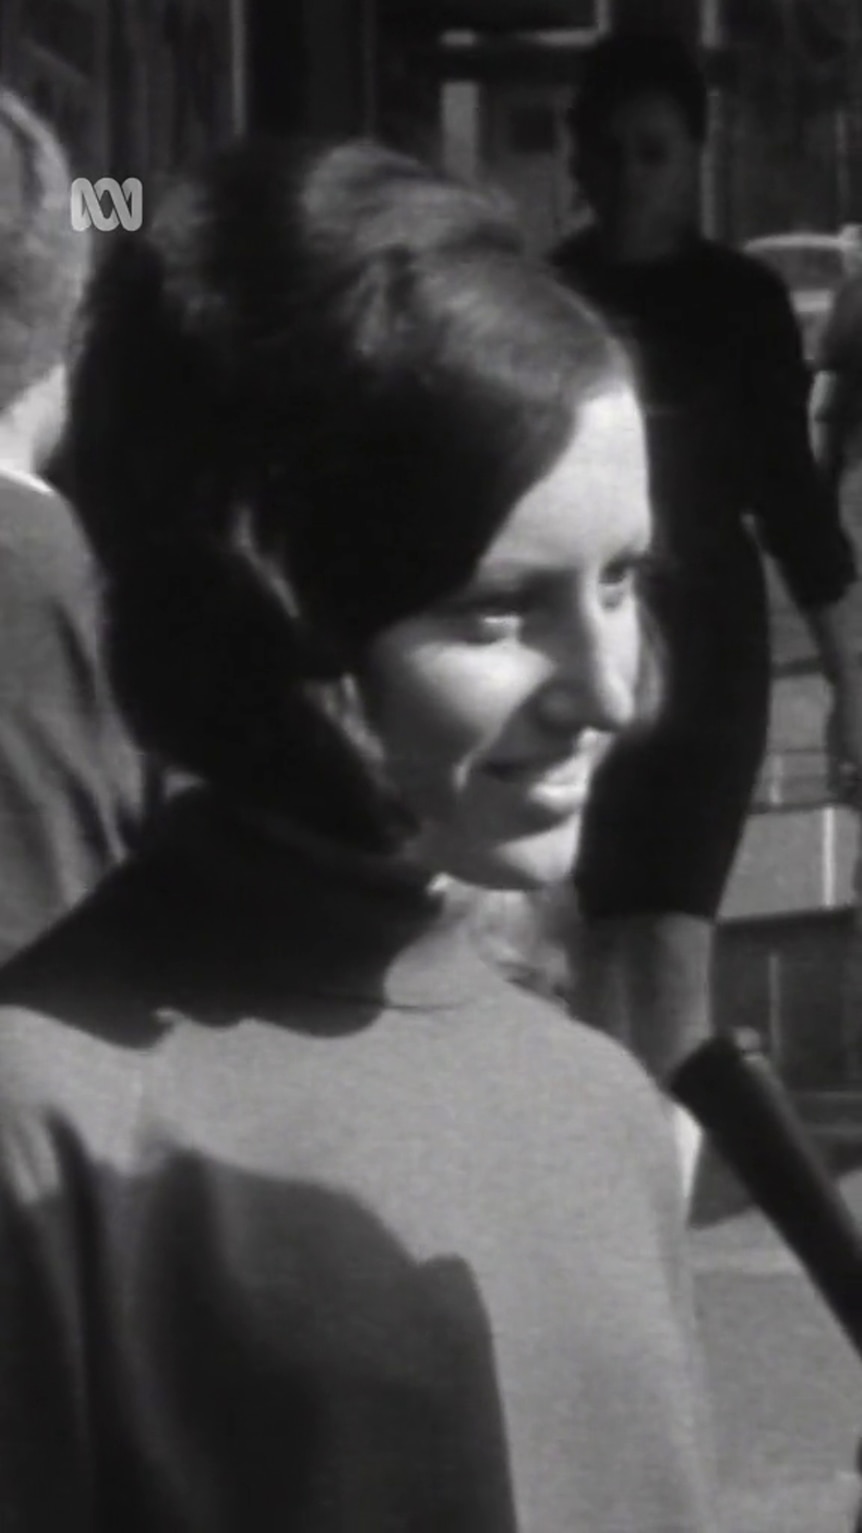 A black and white image shows a young woman with short hair smile as she faces off camera